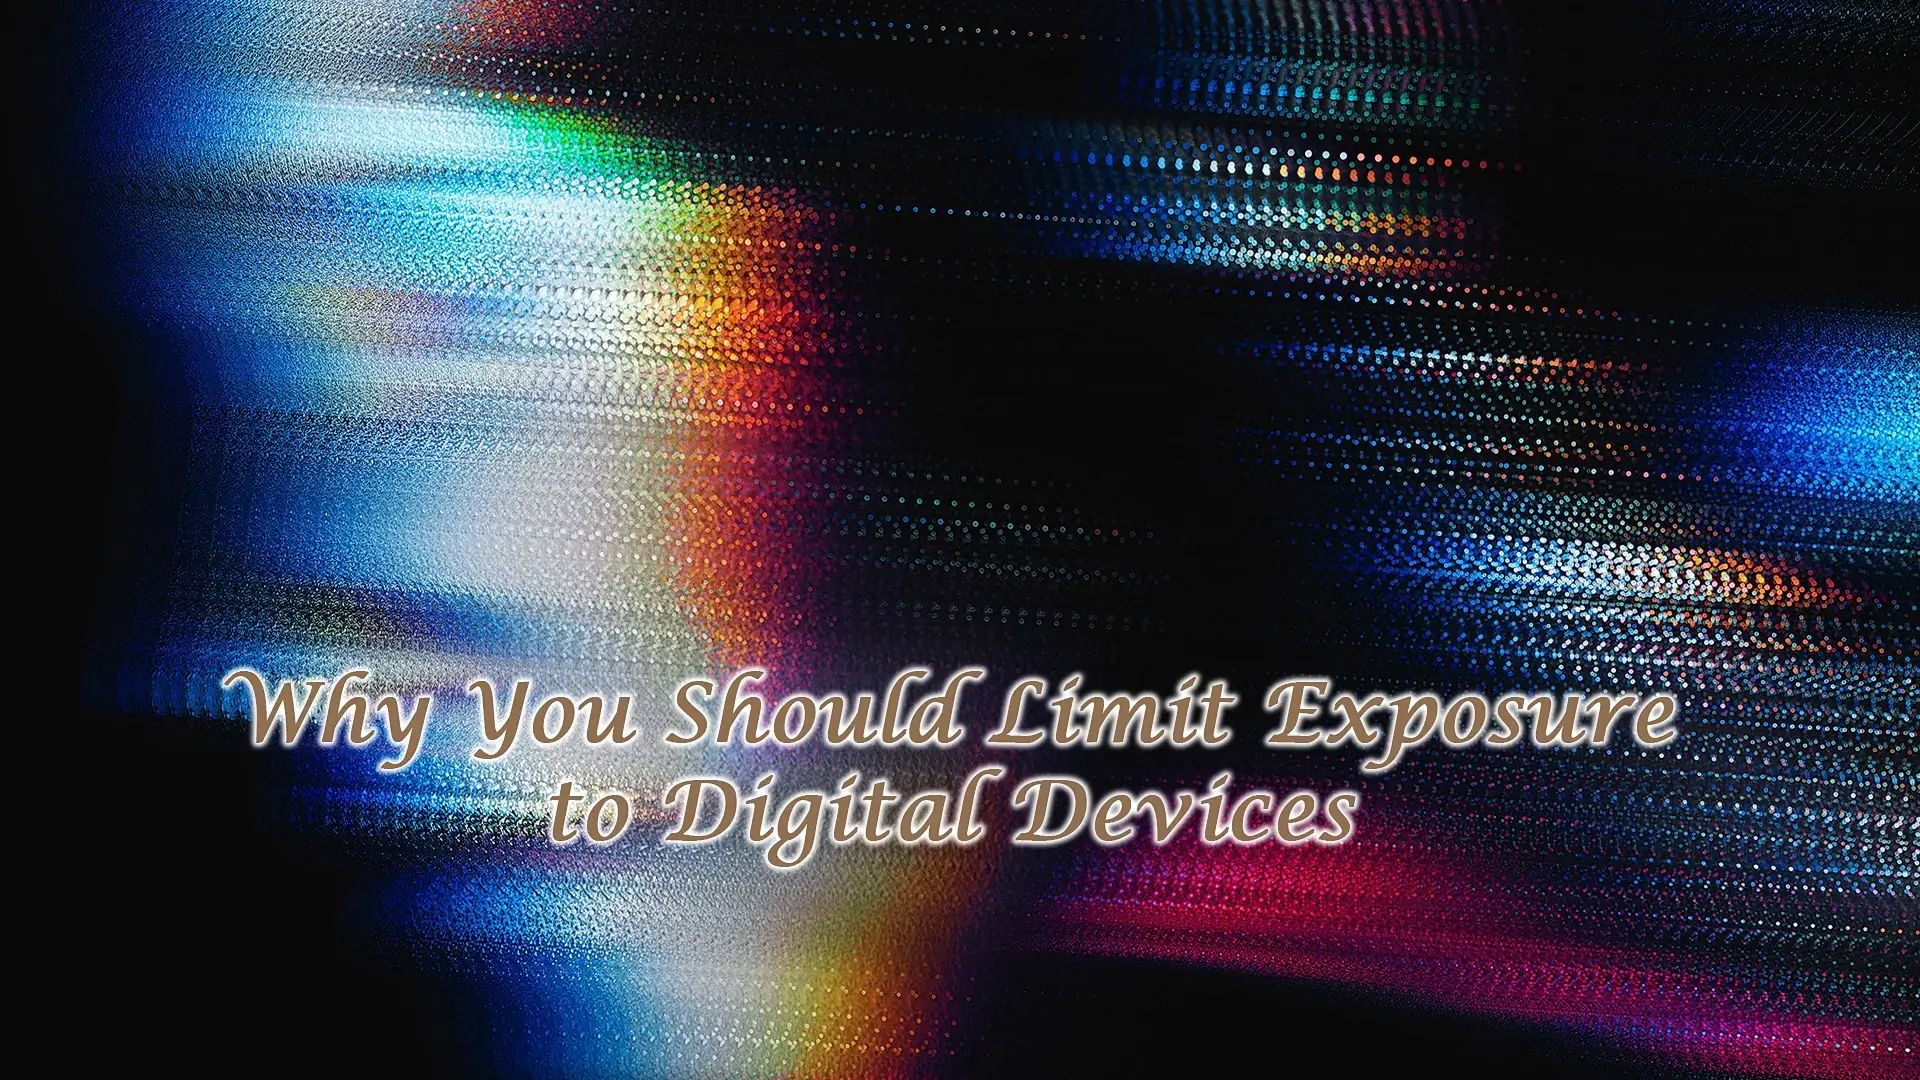 The Importance of Limiting Exposure to Digital Devices